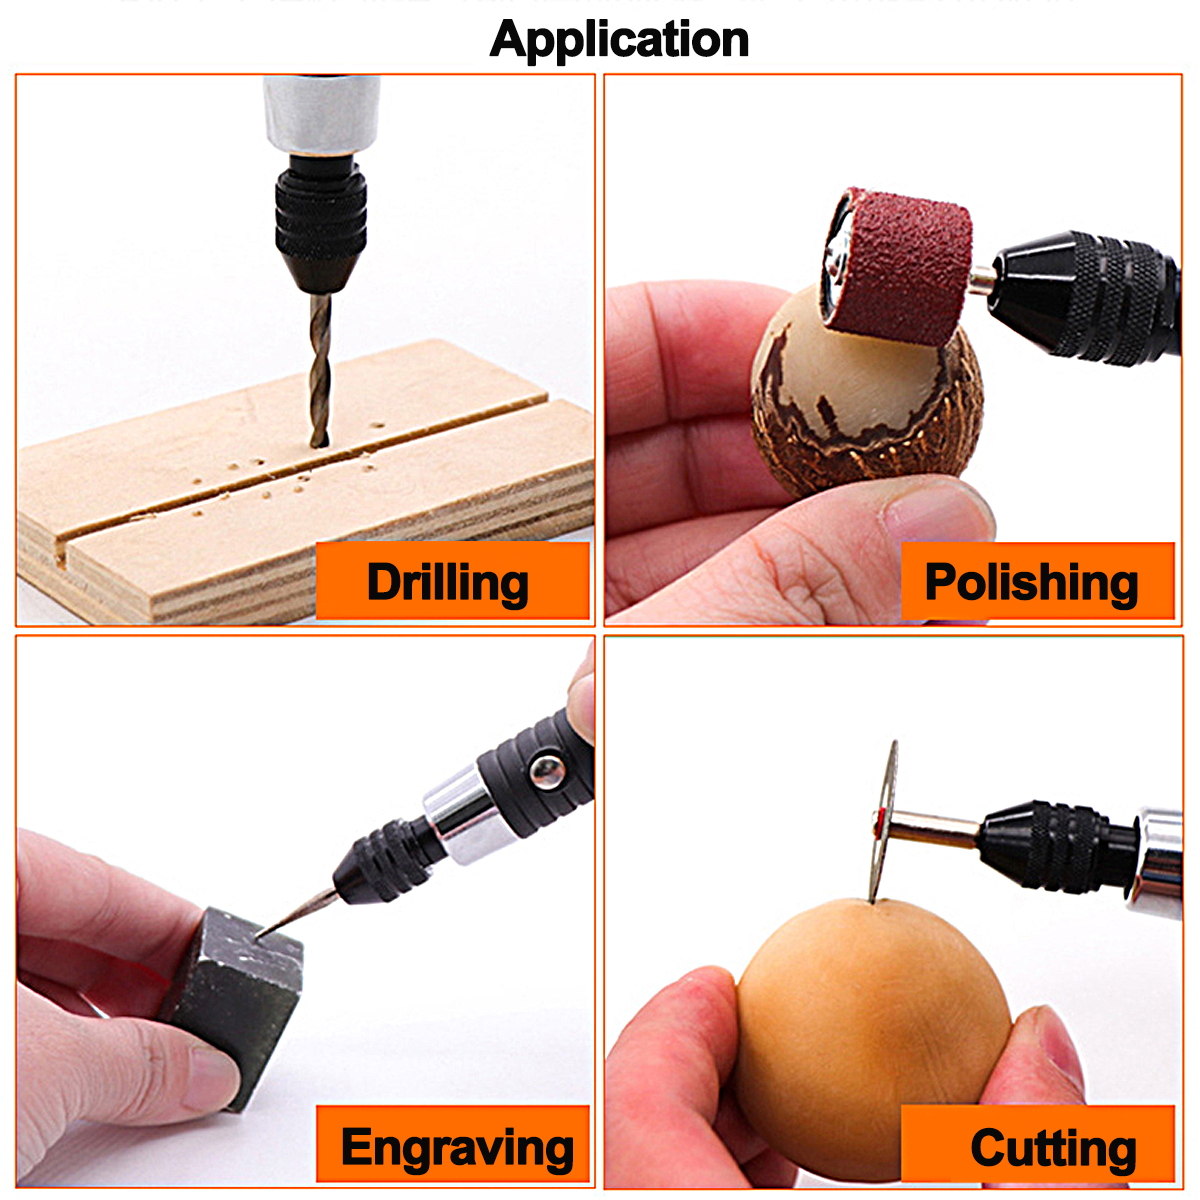 3-Speeds-USB-Rechargeable-Electric-Rotary-Tool-Drill-Grinder-Set-Metal-Wood-Jewelry-Polishing-Engrav-1810530-7